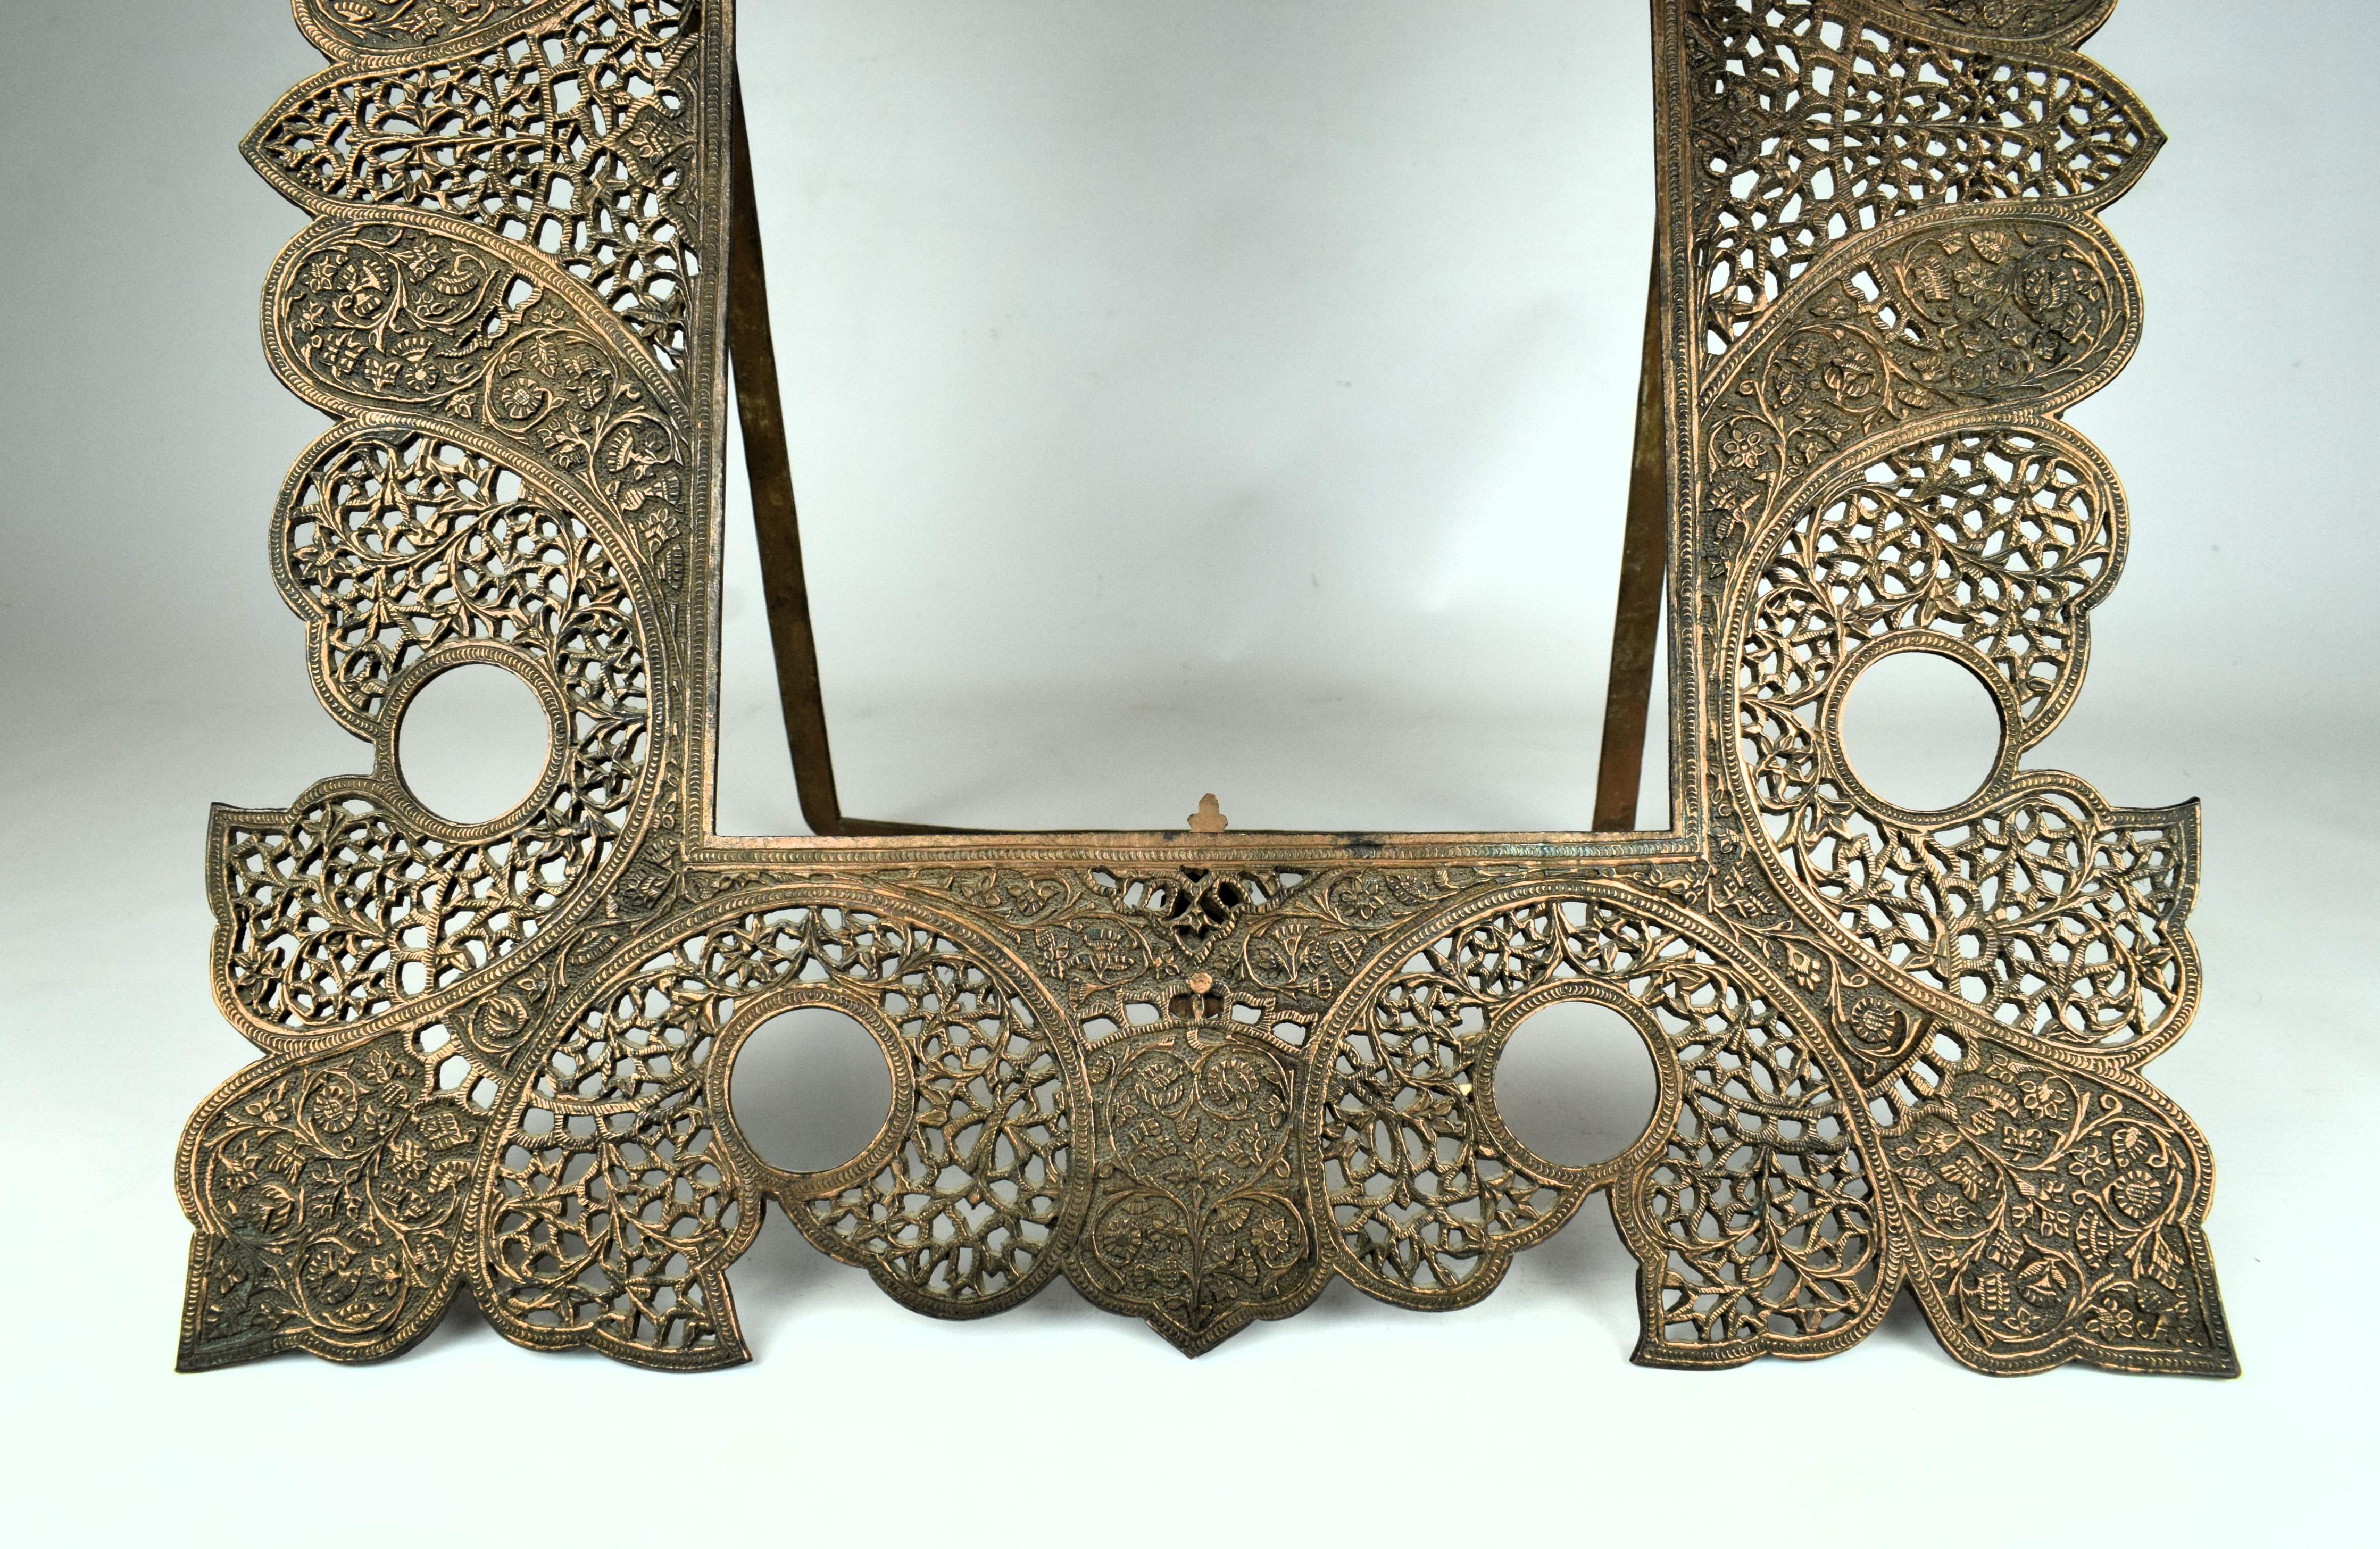 The Kashmiri copper cutwork engraved frame from the late 19th century is a masterpiece of metal artistry, showcasing the skilled craftsmanship that has been passed down through generations. The frame is crafted from high-quality copper, providing a